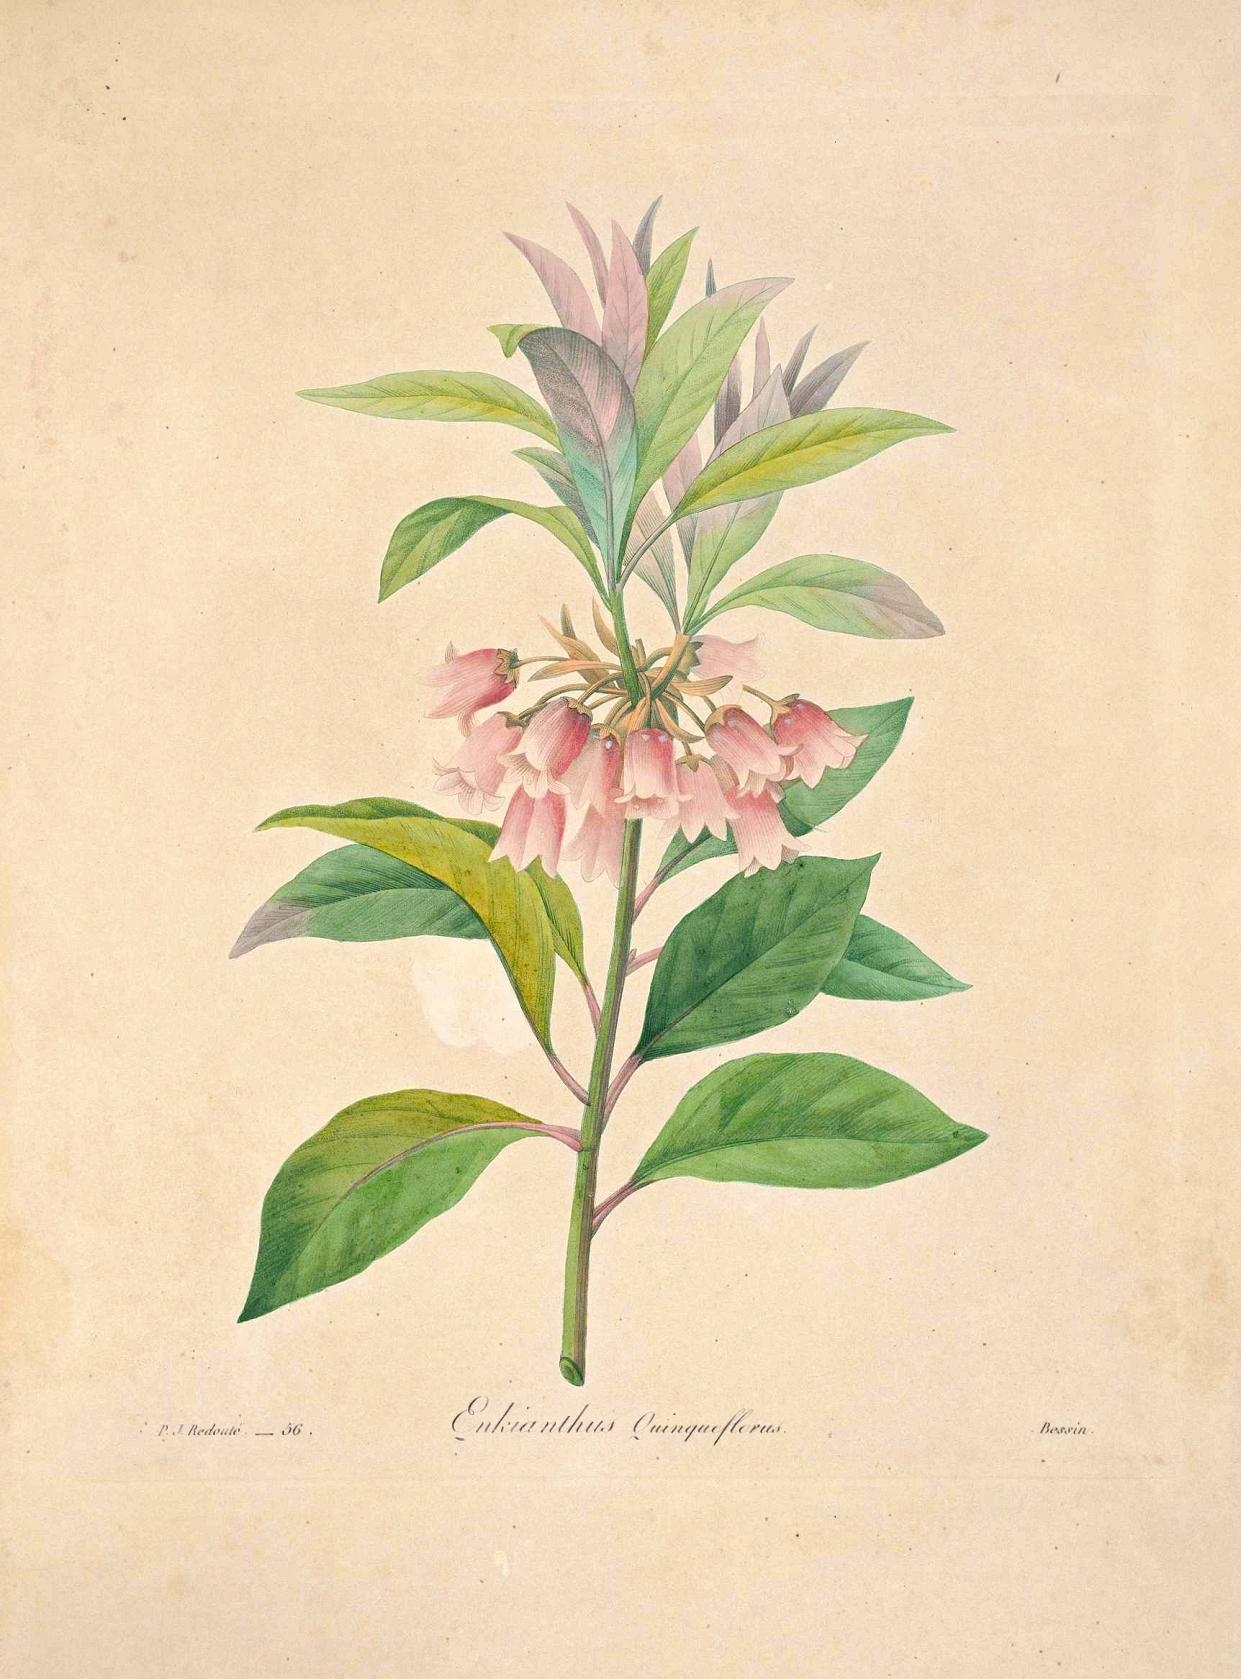 a drawing of a flower is shown in color